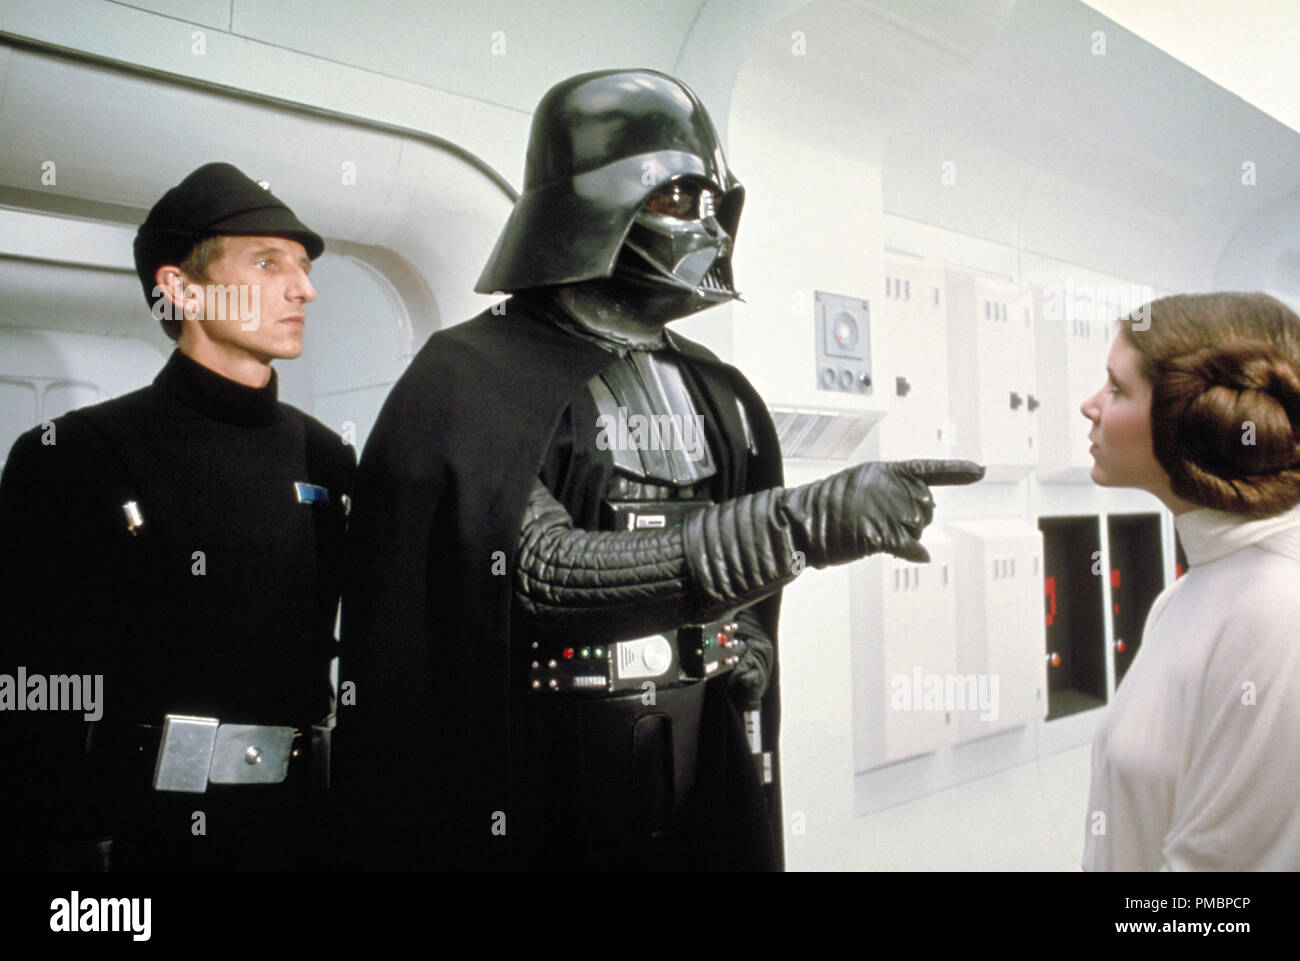 Boer Vervagen Ironisch Darth Vader and Princess Leia in "Star Wars Episode IV: A New Hope" (1977)  File Reference # 32603 421THA Stock Photo - Alamy